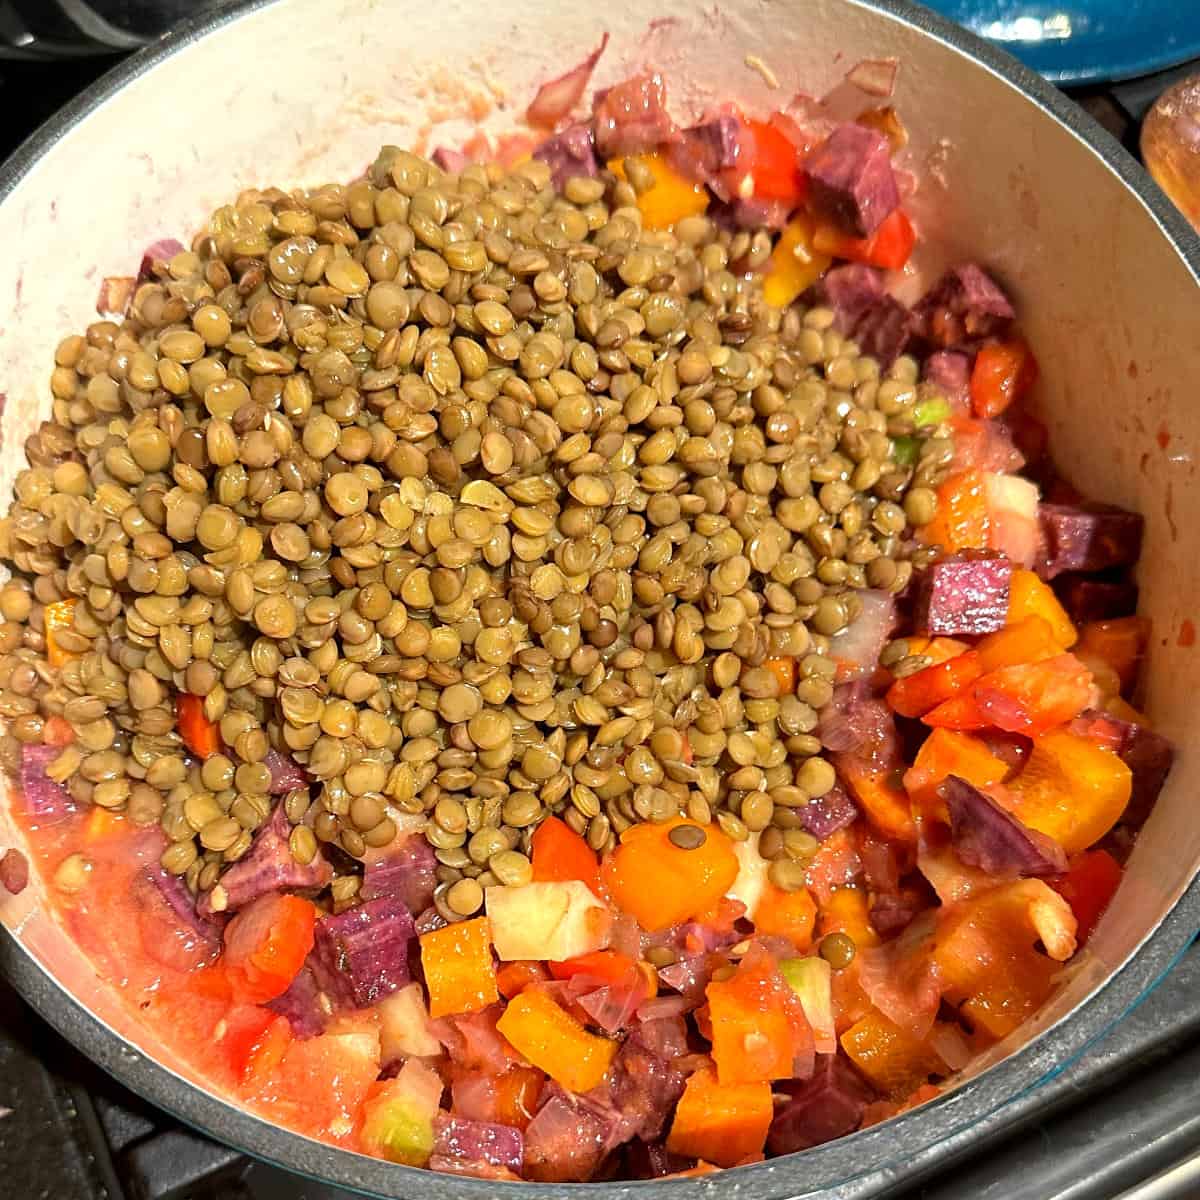 Lentils added to pot with tomato puree and vegetables.